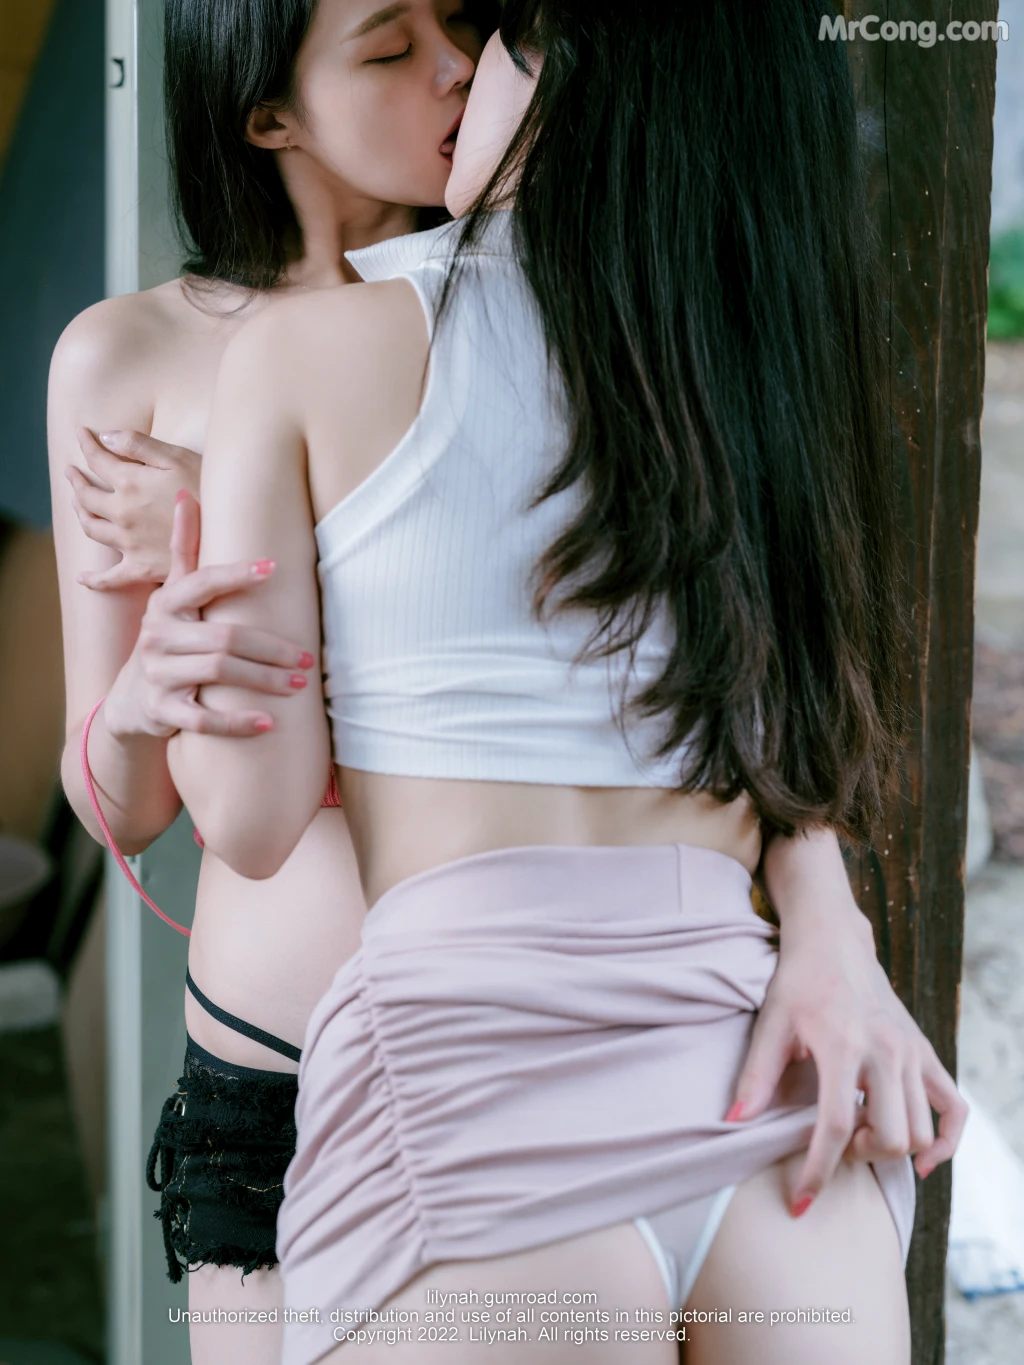 [Lilynah] Inah (이나) x Shaany (샤니): Vol.3 A Beautiful Companion (104 photos)